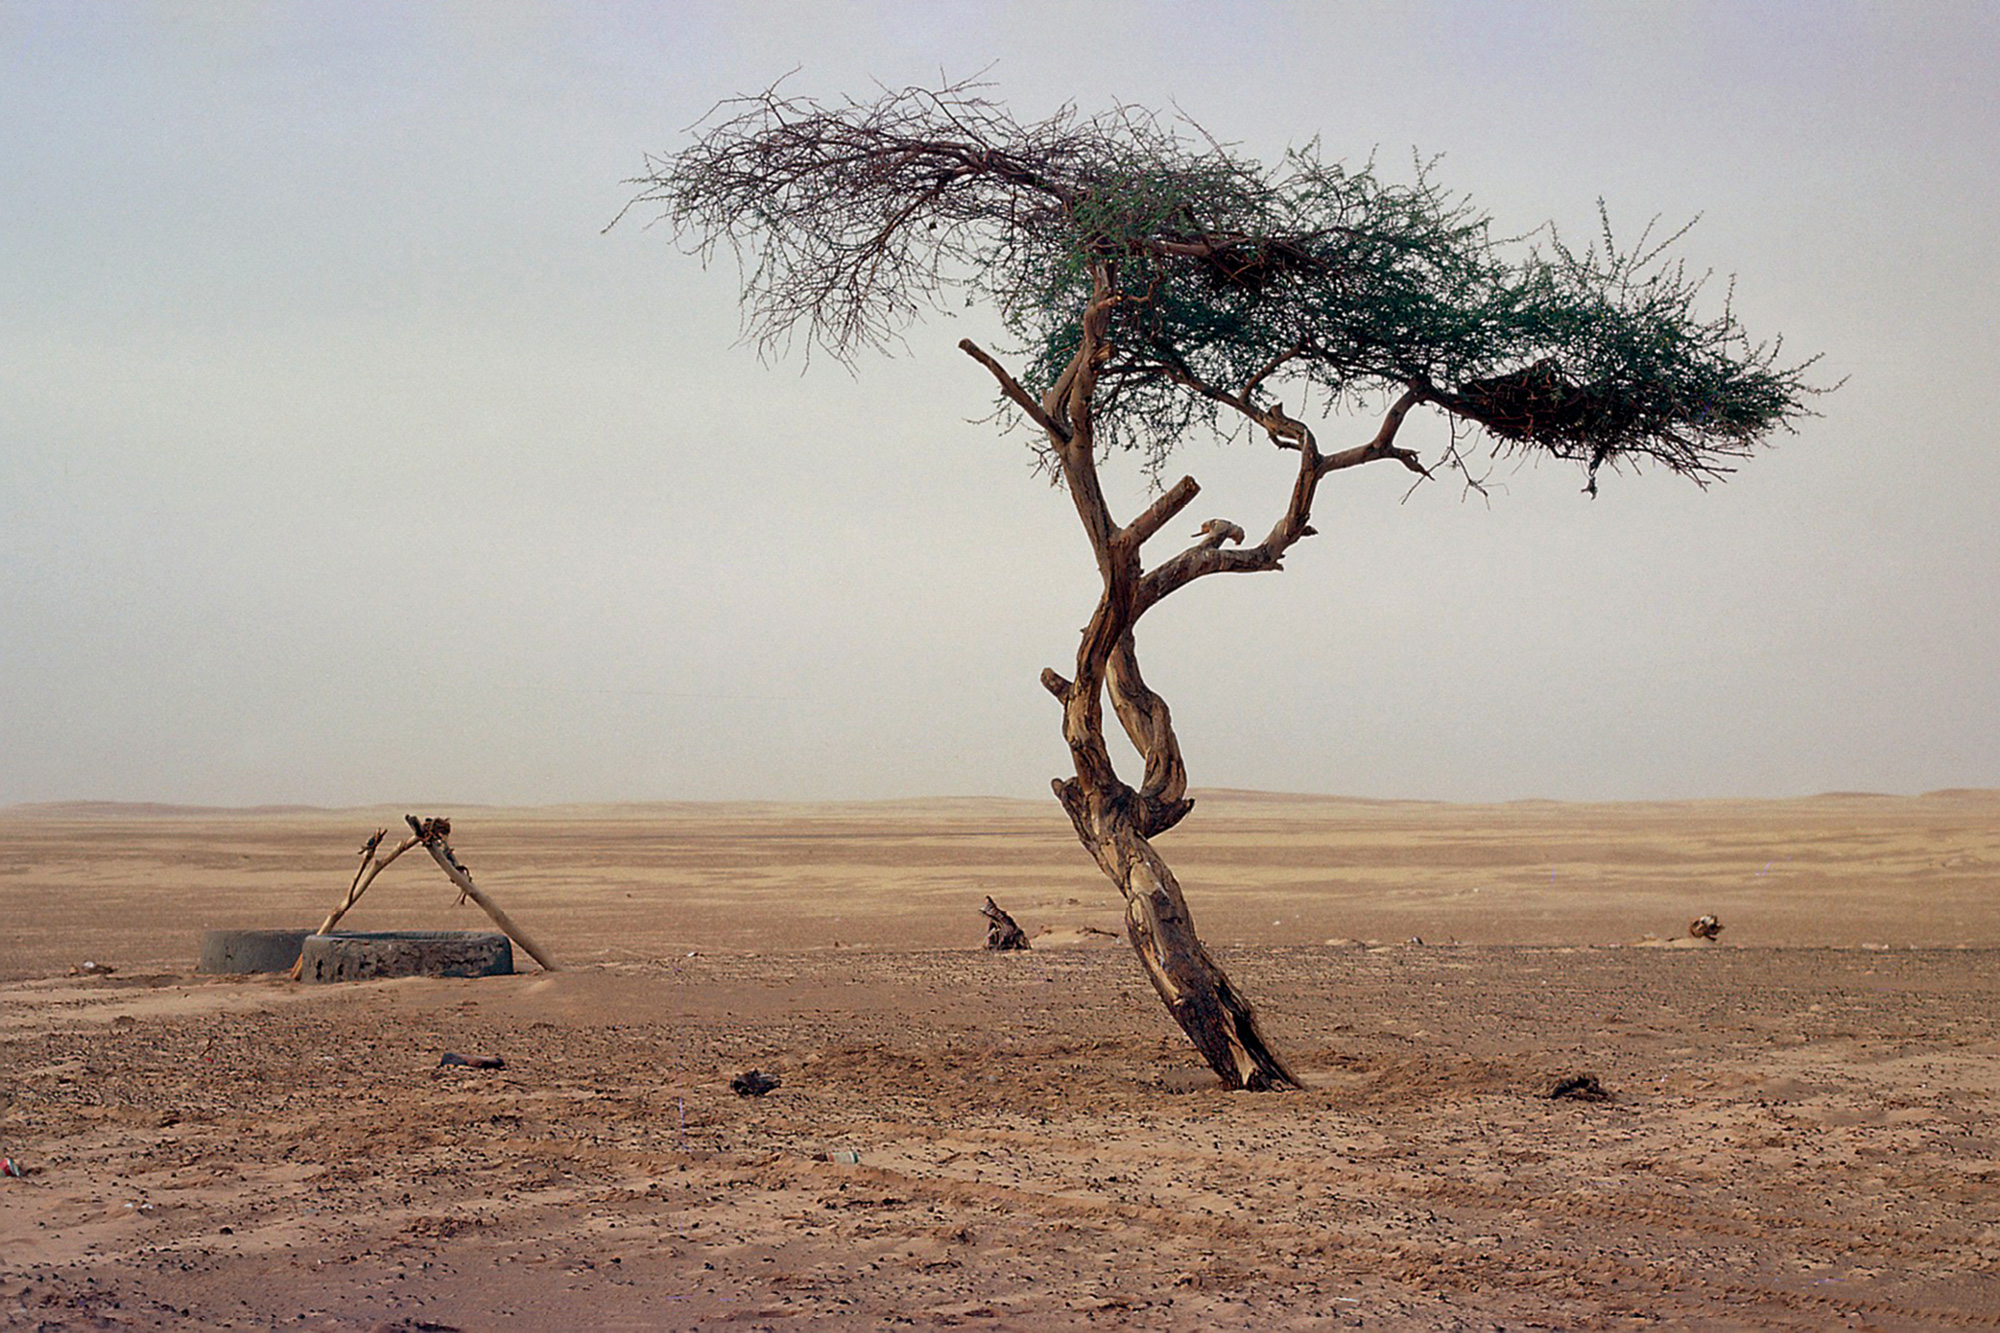 A photograph of the Tree of Ténéré as it appeared between nineteen fifty-nine, when it was first struck by a vehicle, and nineteen seventy-three, when it was finally killed.